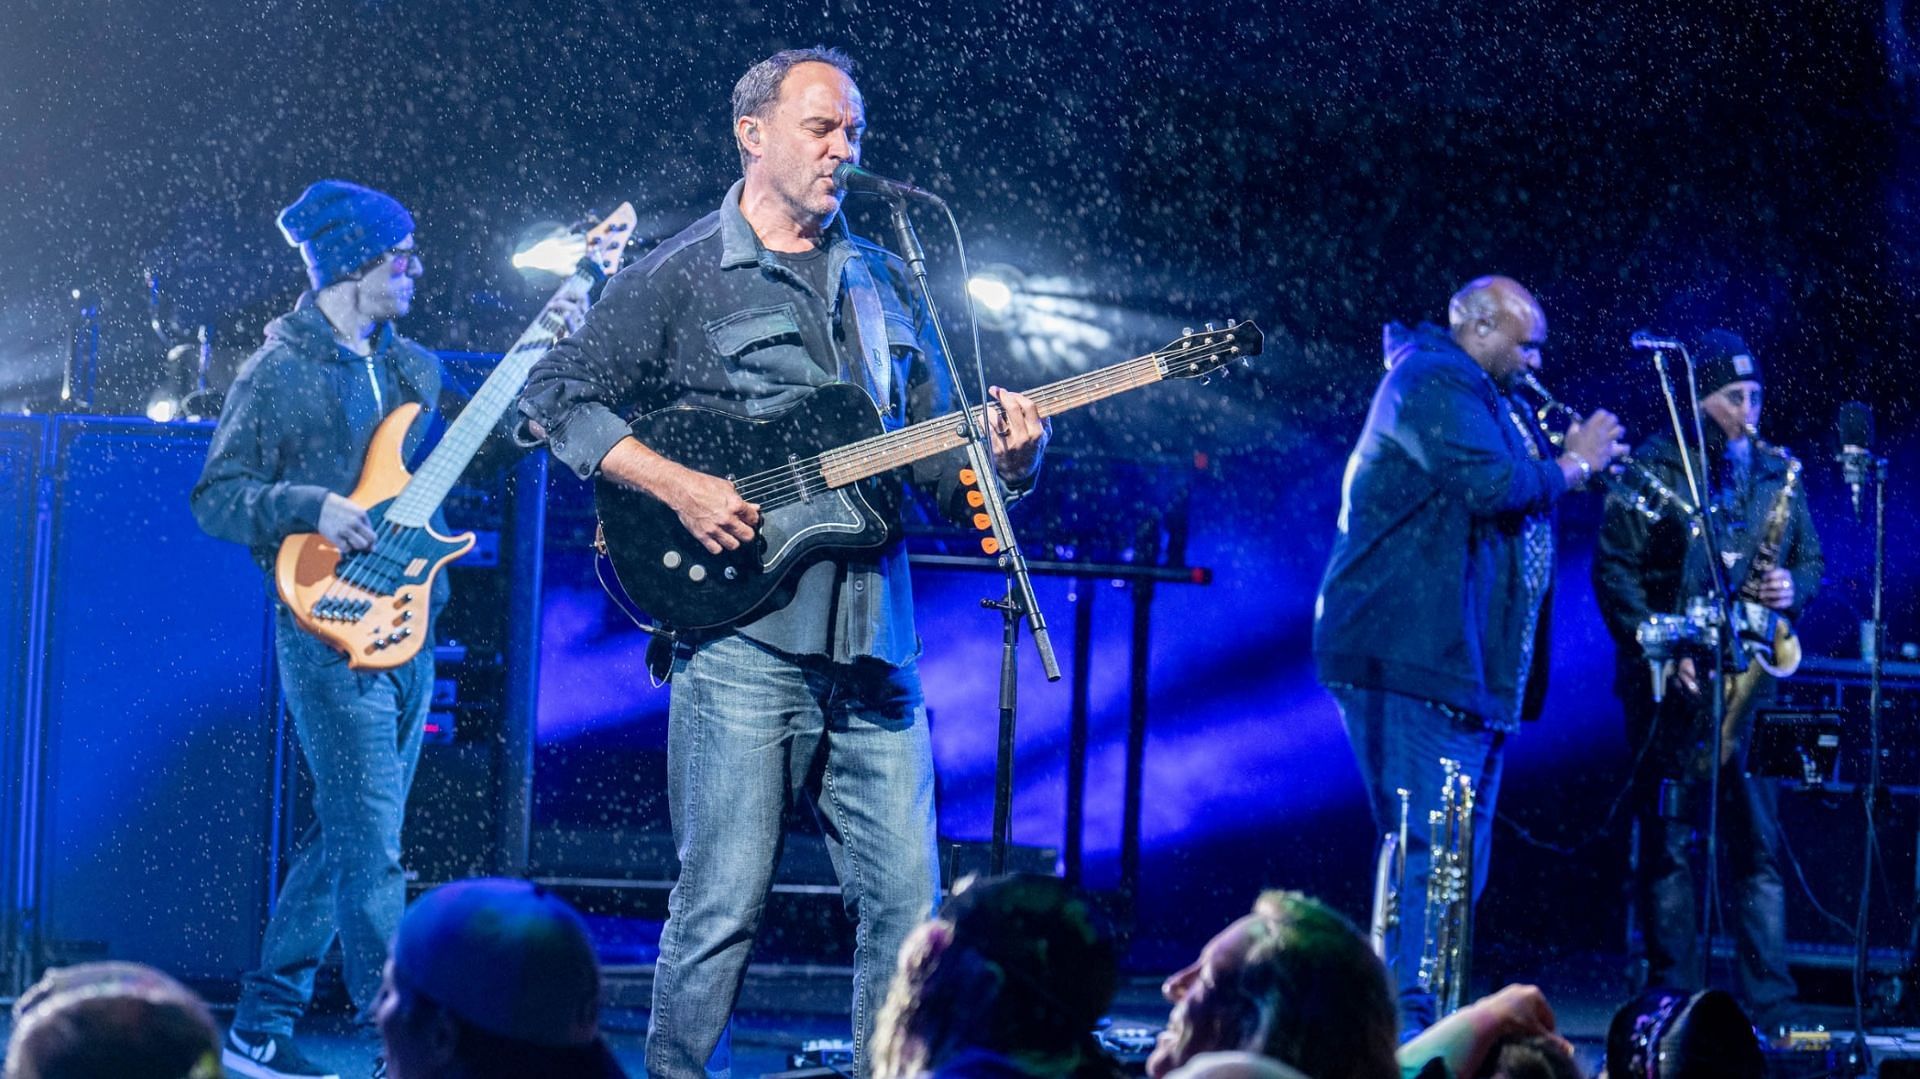 Dave Matthews band has announced an extensive tour for 2023. (Image via Twitter / @dmb)